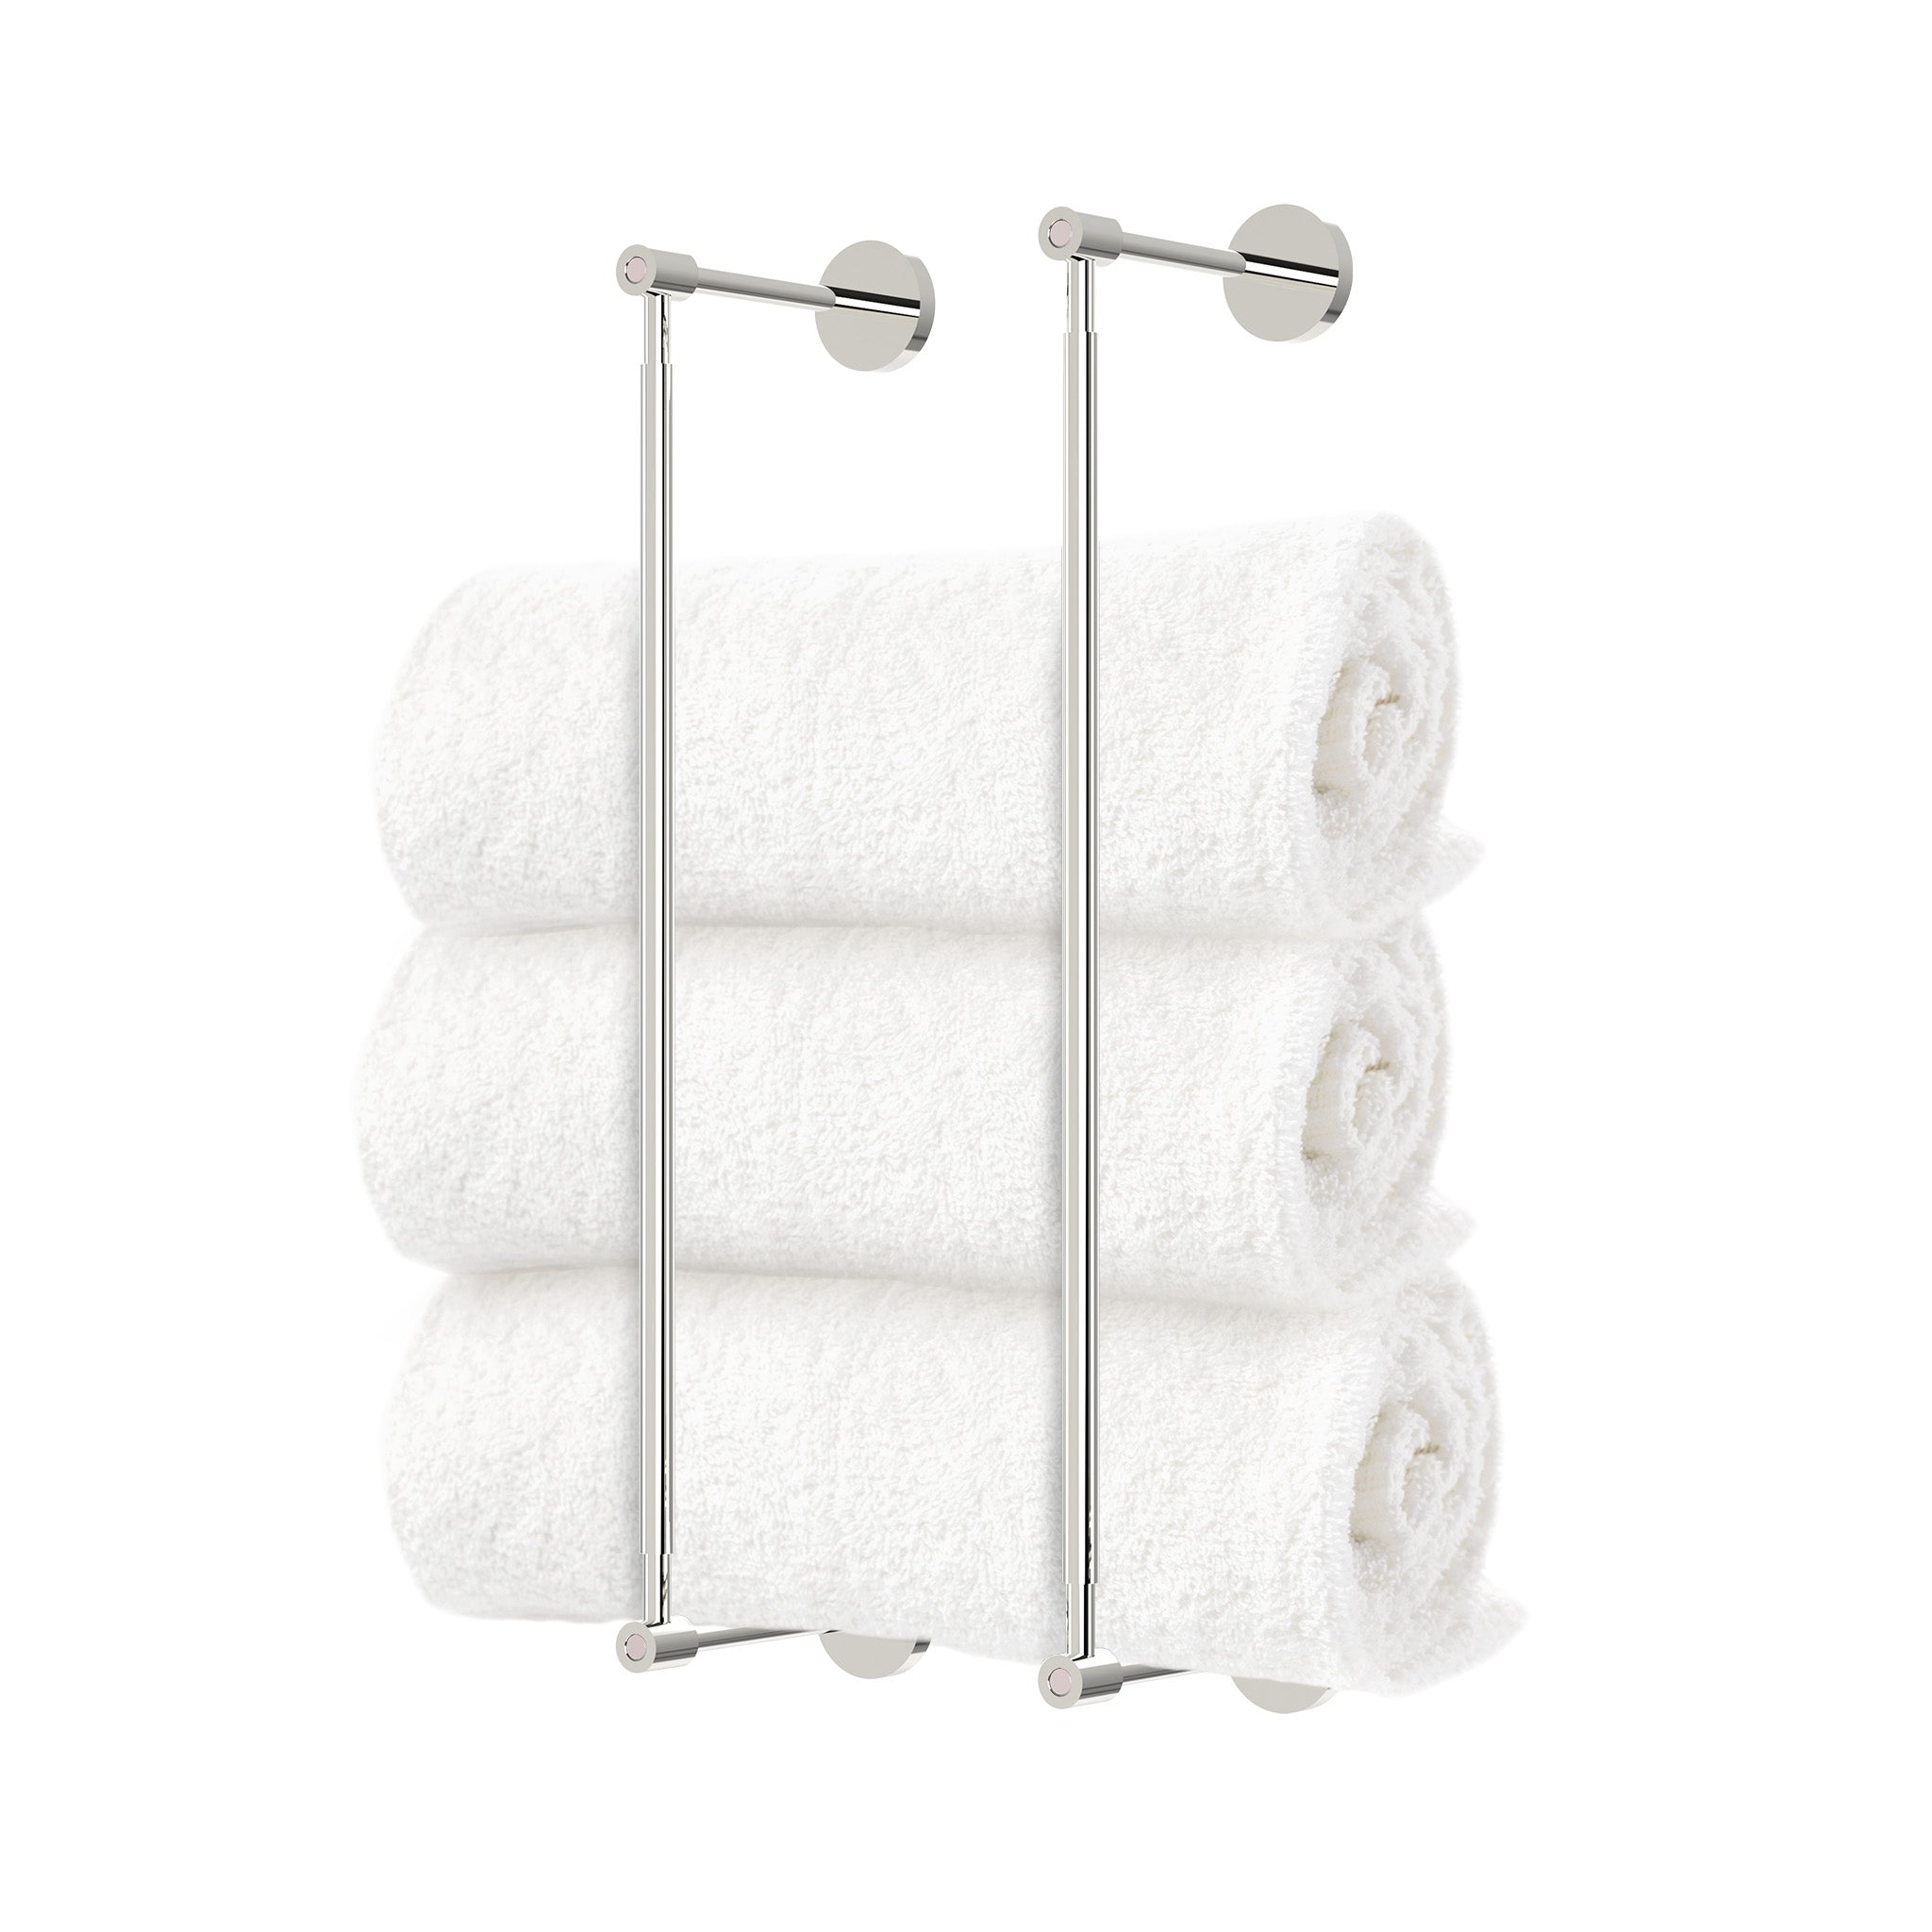 Nickel and barely head towel rack 18 inch dutton brown hardware